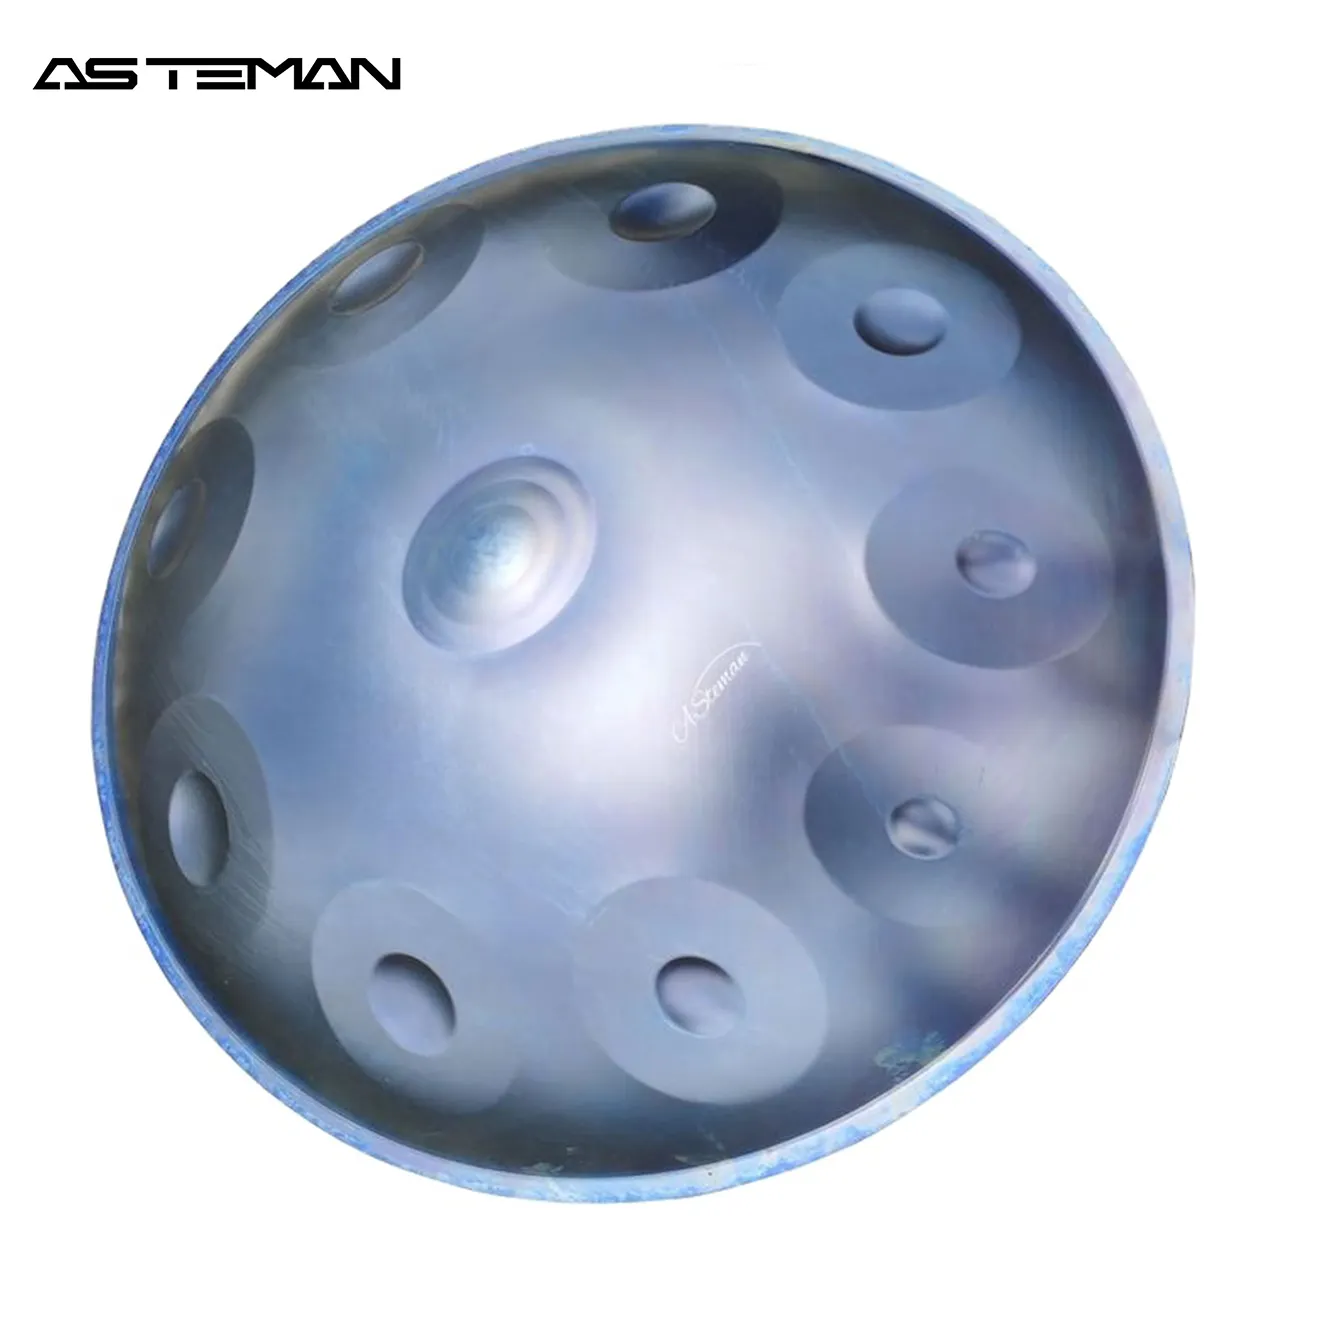 ASTEMAN Handpan Ice Age Series Blue 10 Note Instrument Music Quenching Process Electronic Drum Set Musical Instruments